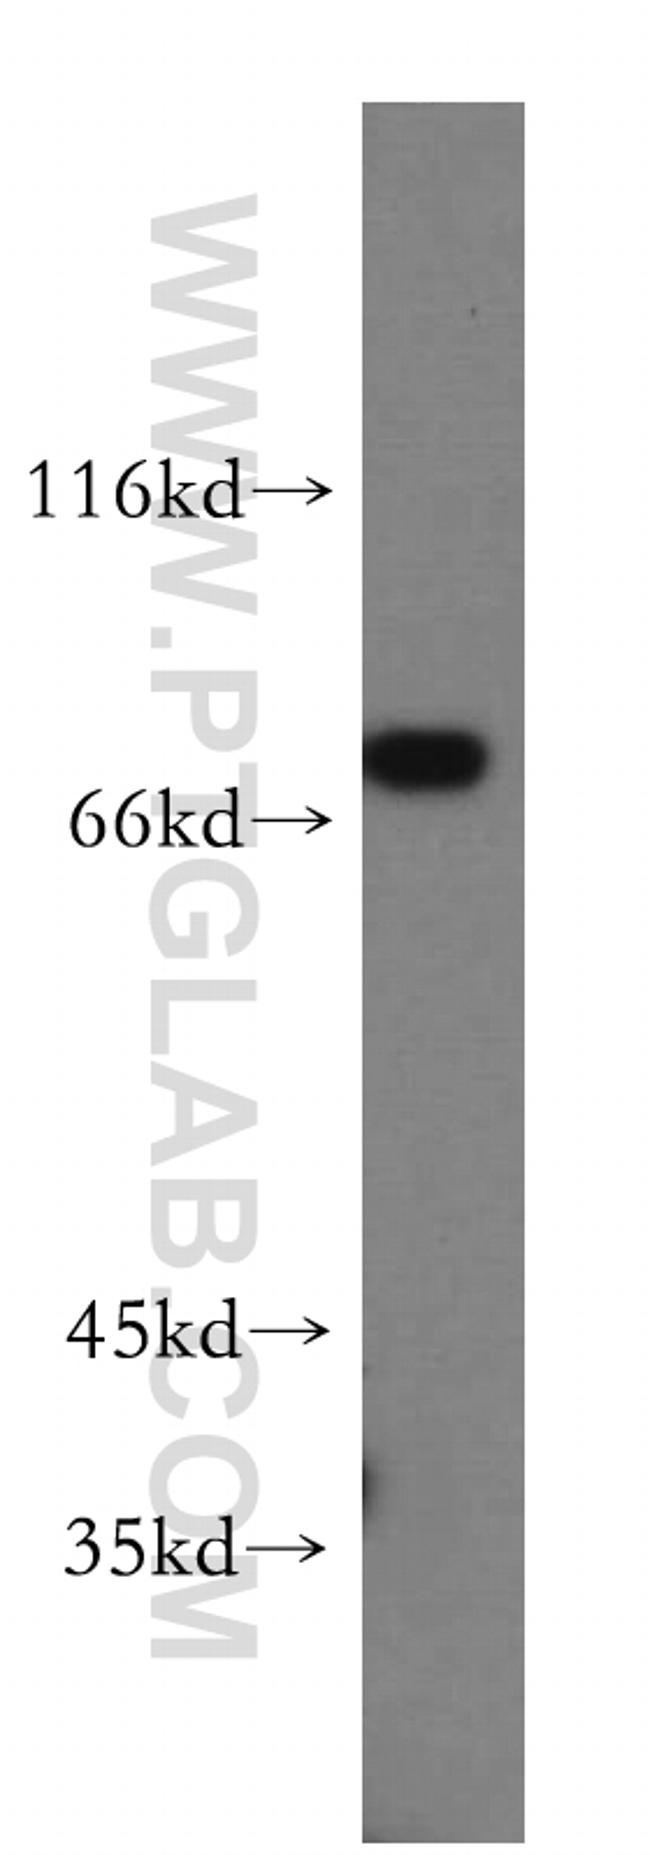 GFPT1 Antibody in Western Blot (WB)